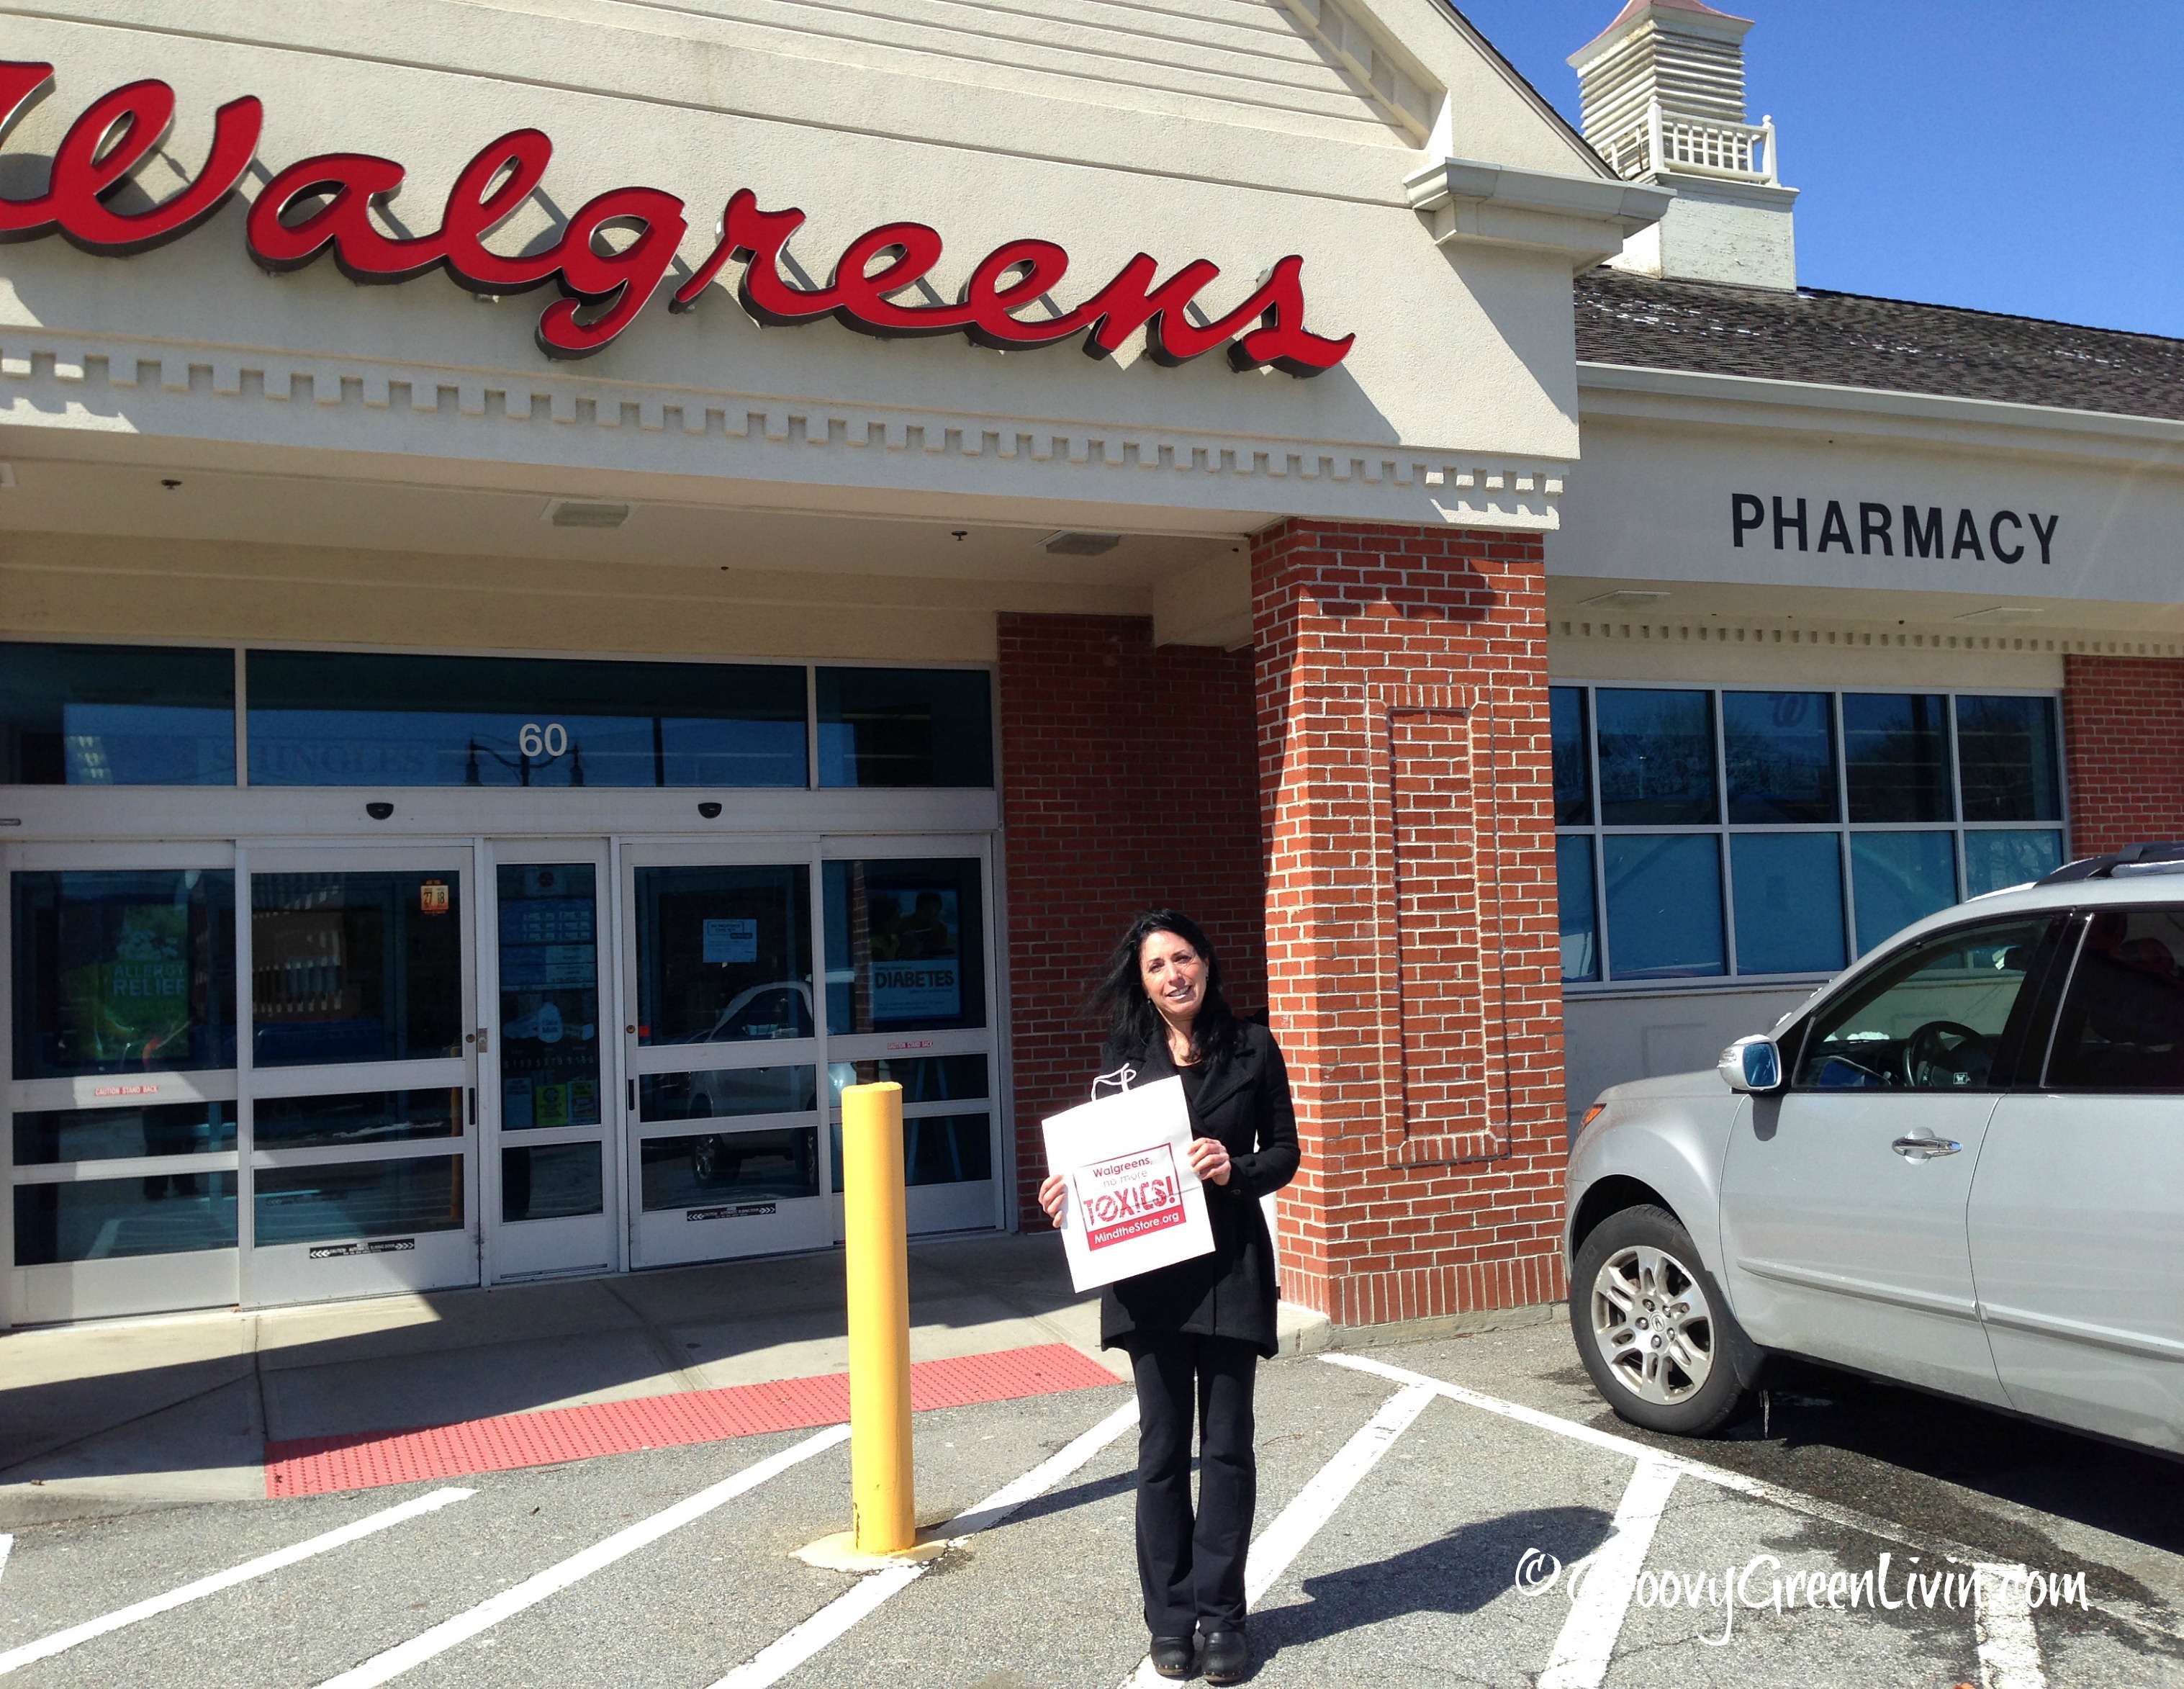 Hey Walgreens, We Still Want Safer Products